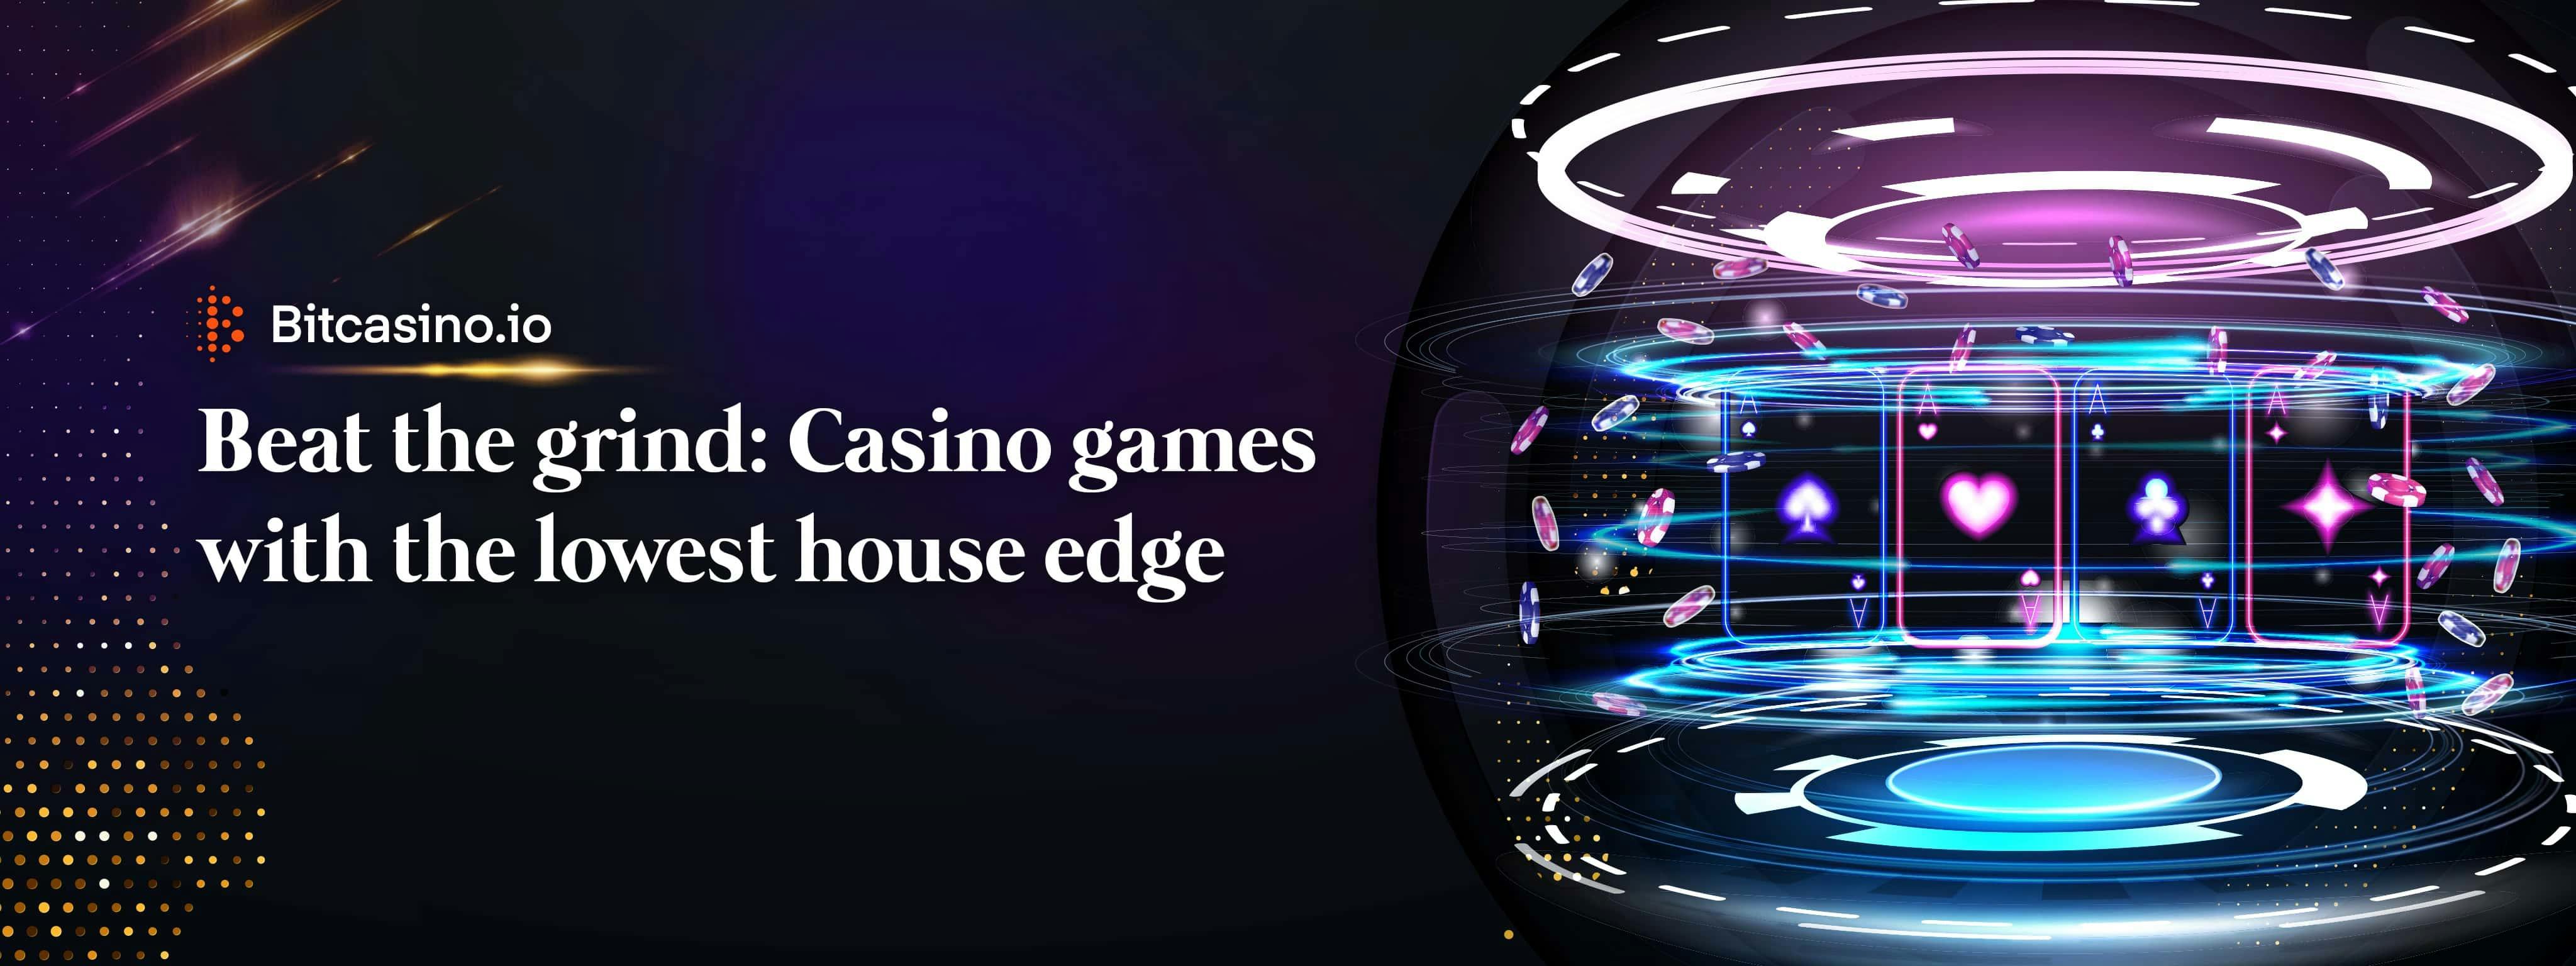 Beat the grind: Casino games with the lowest house edge